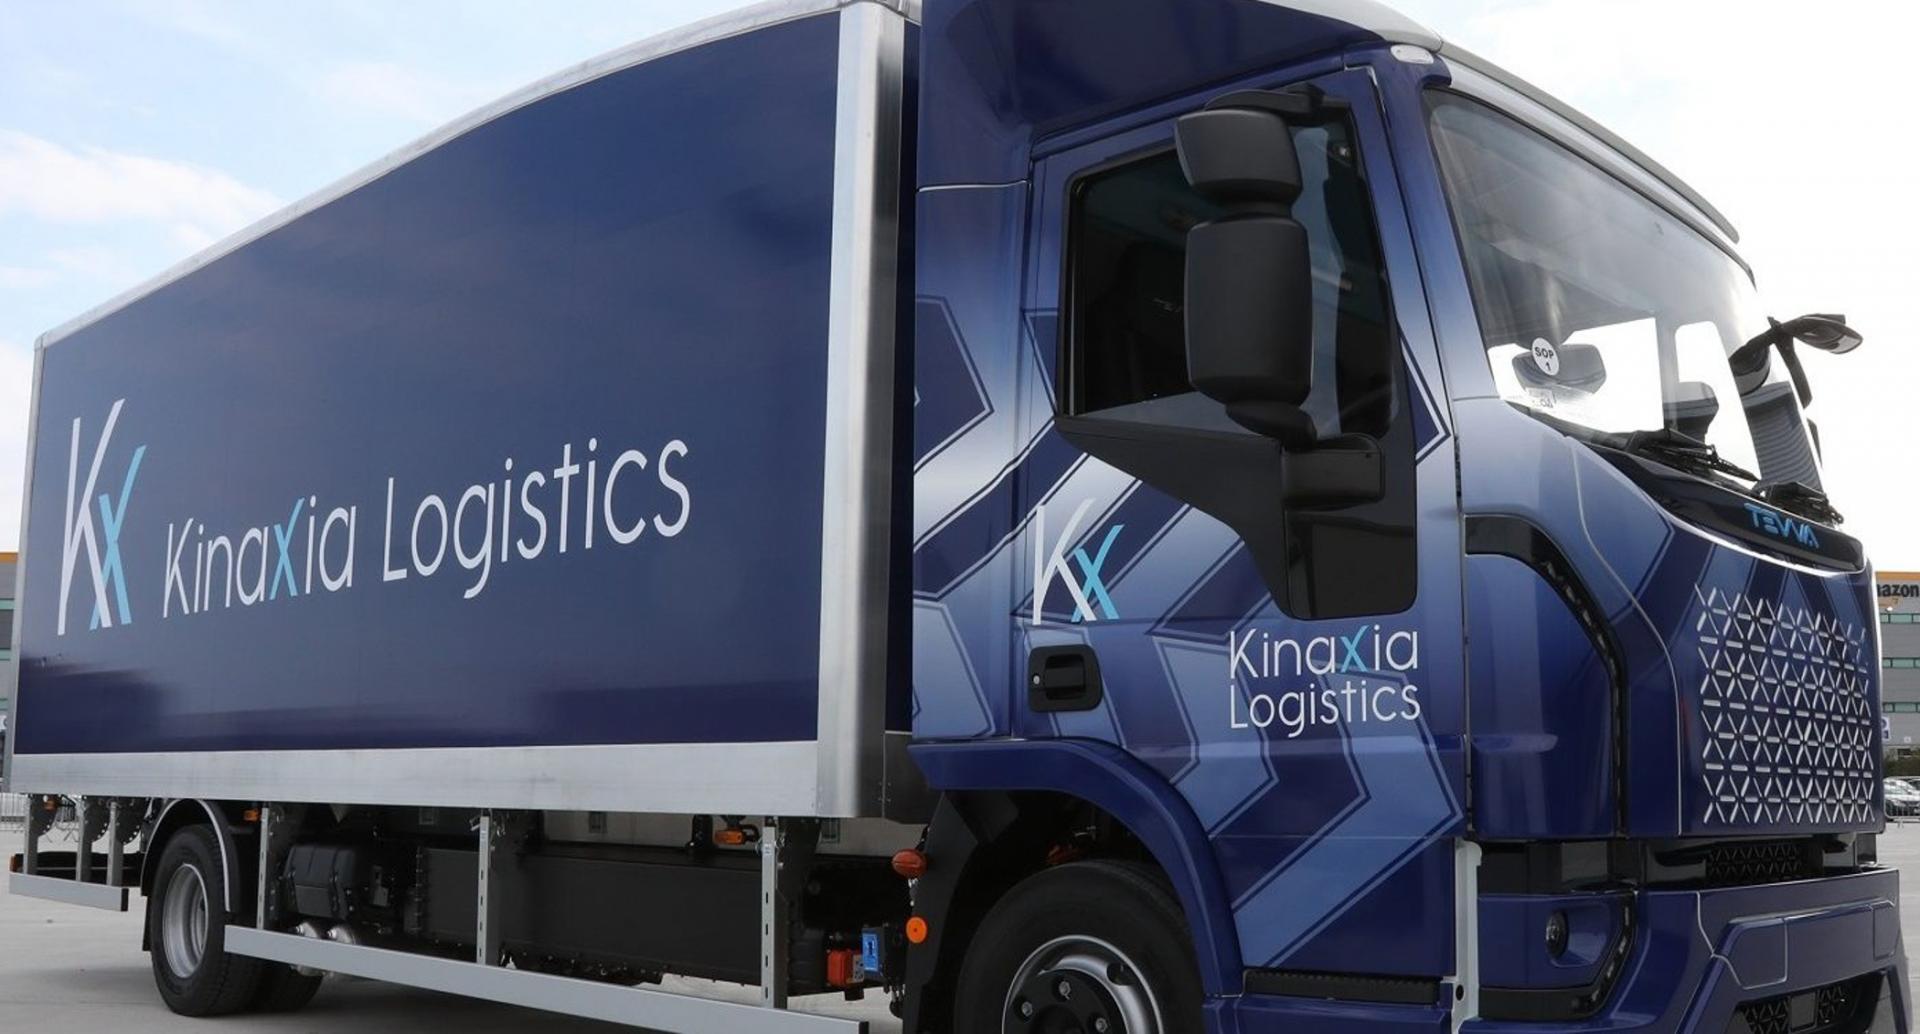 Macclesfield logistics firm acquires counterpart prior to administration